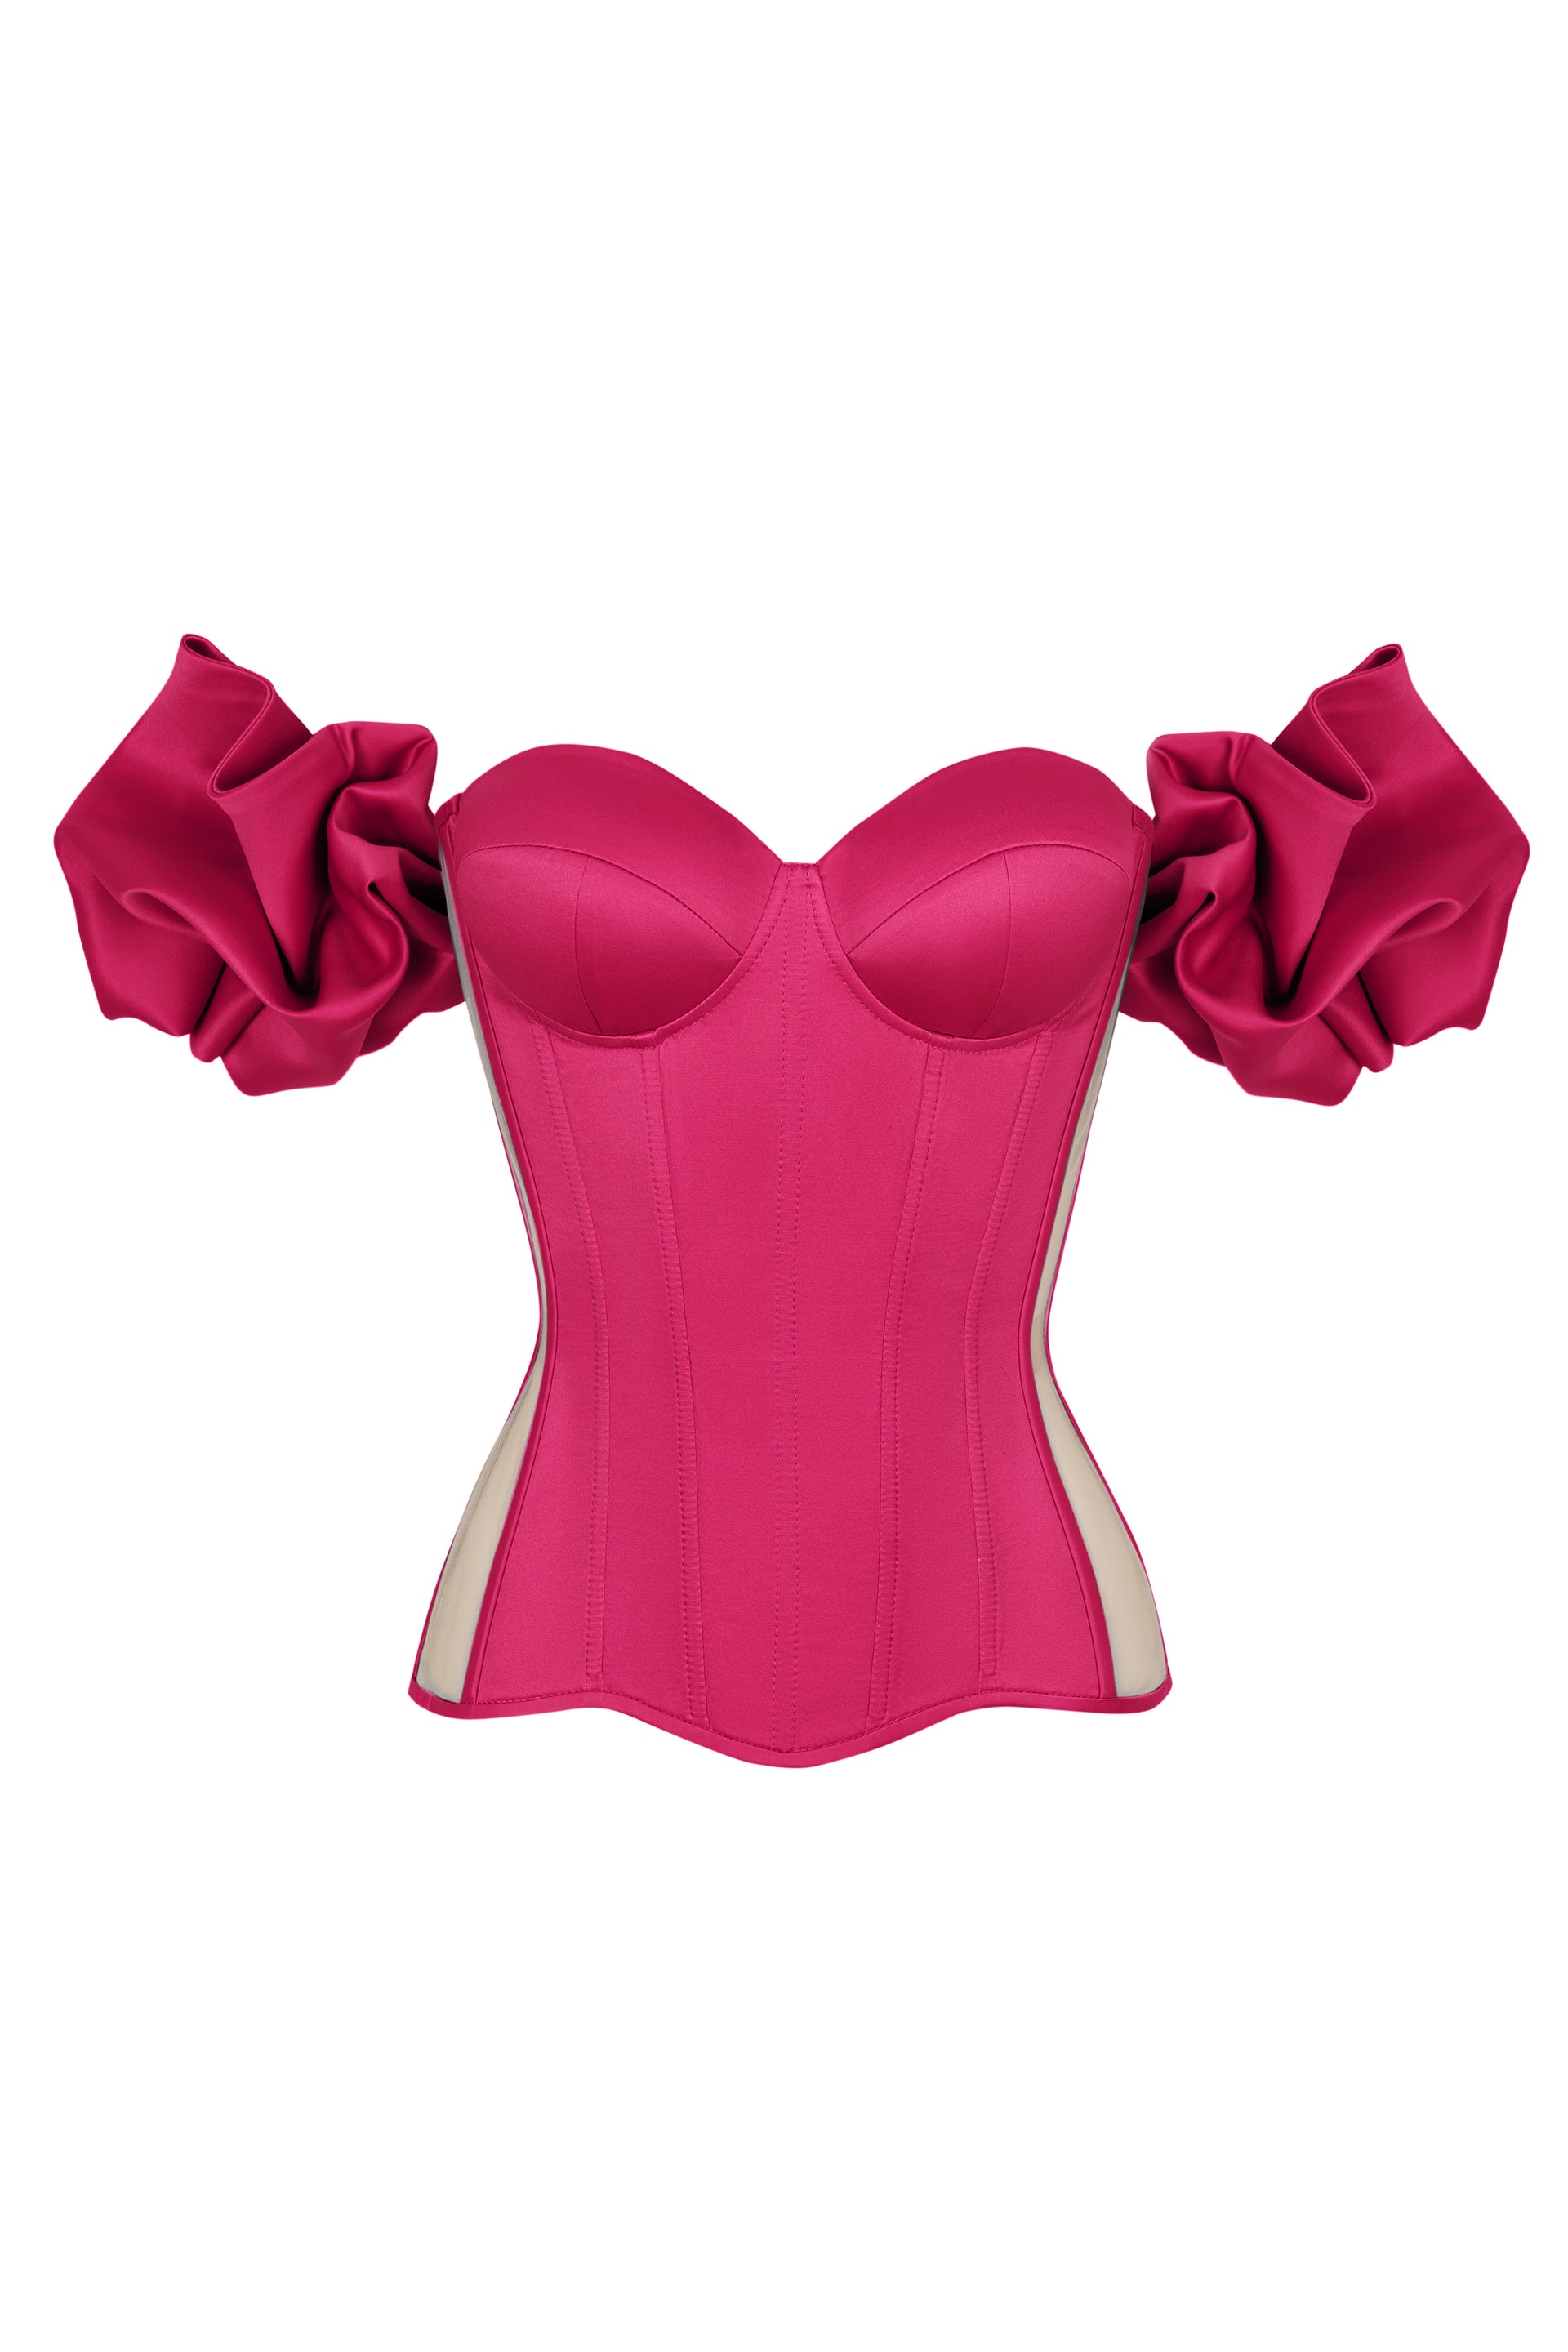 Shocking pink satin corset with transparent back and detachable sleeves